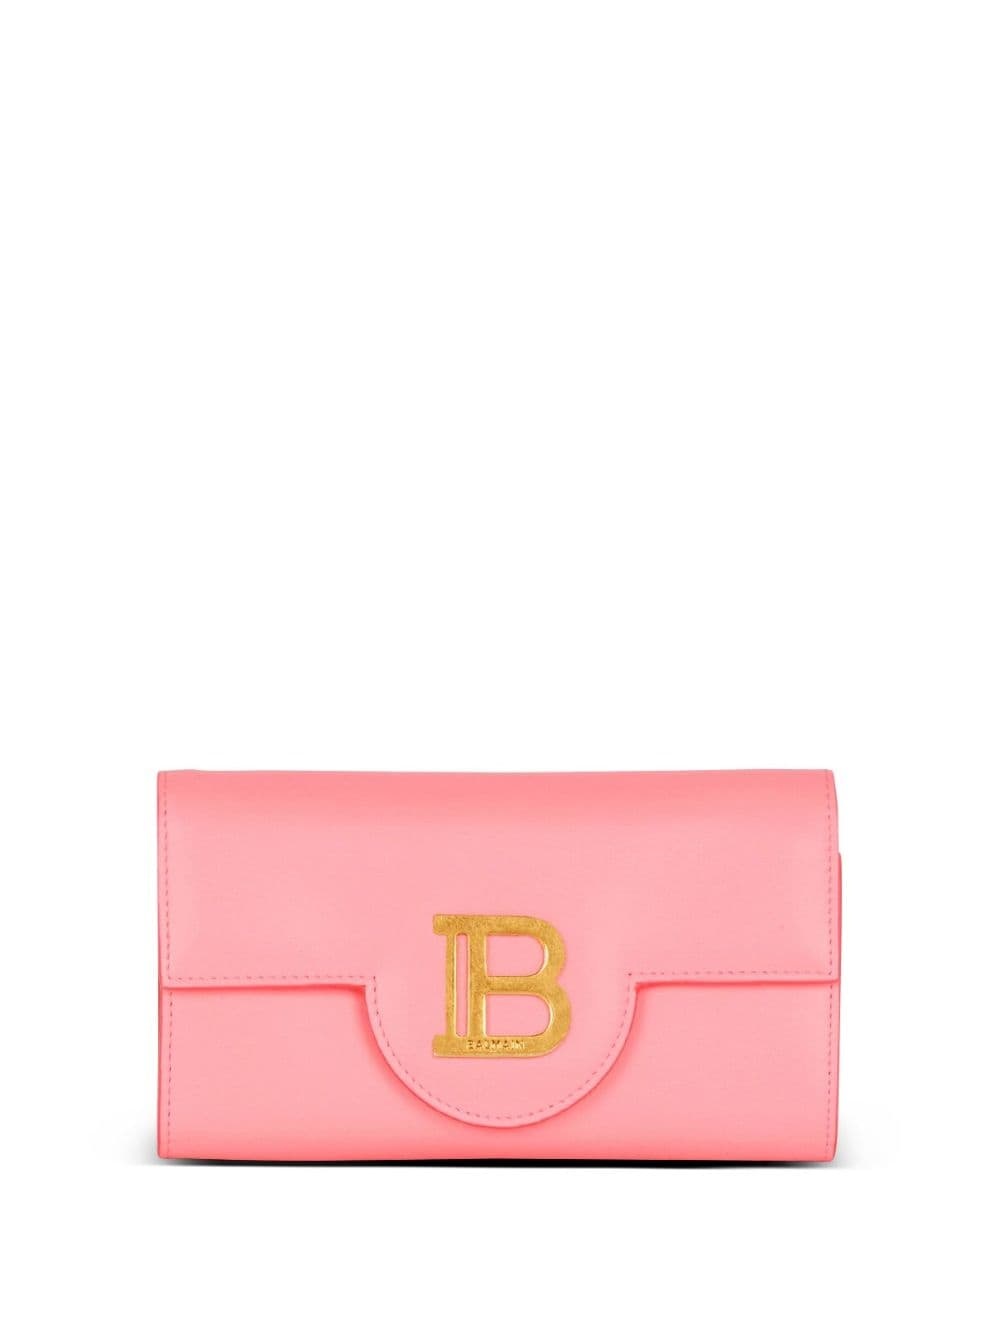 B-Buzz leather wallet - 1